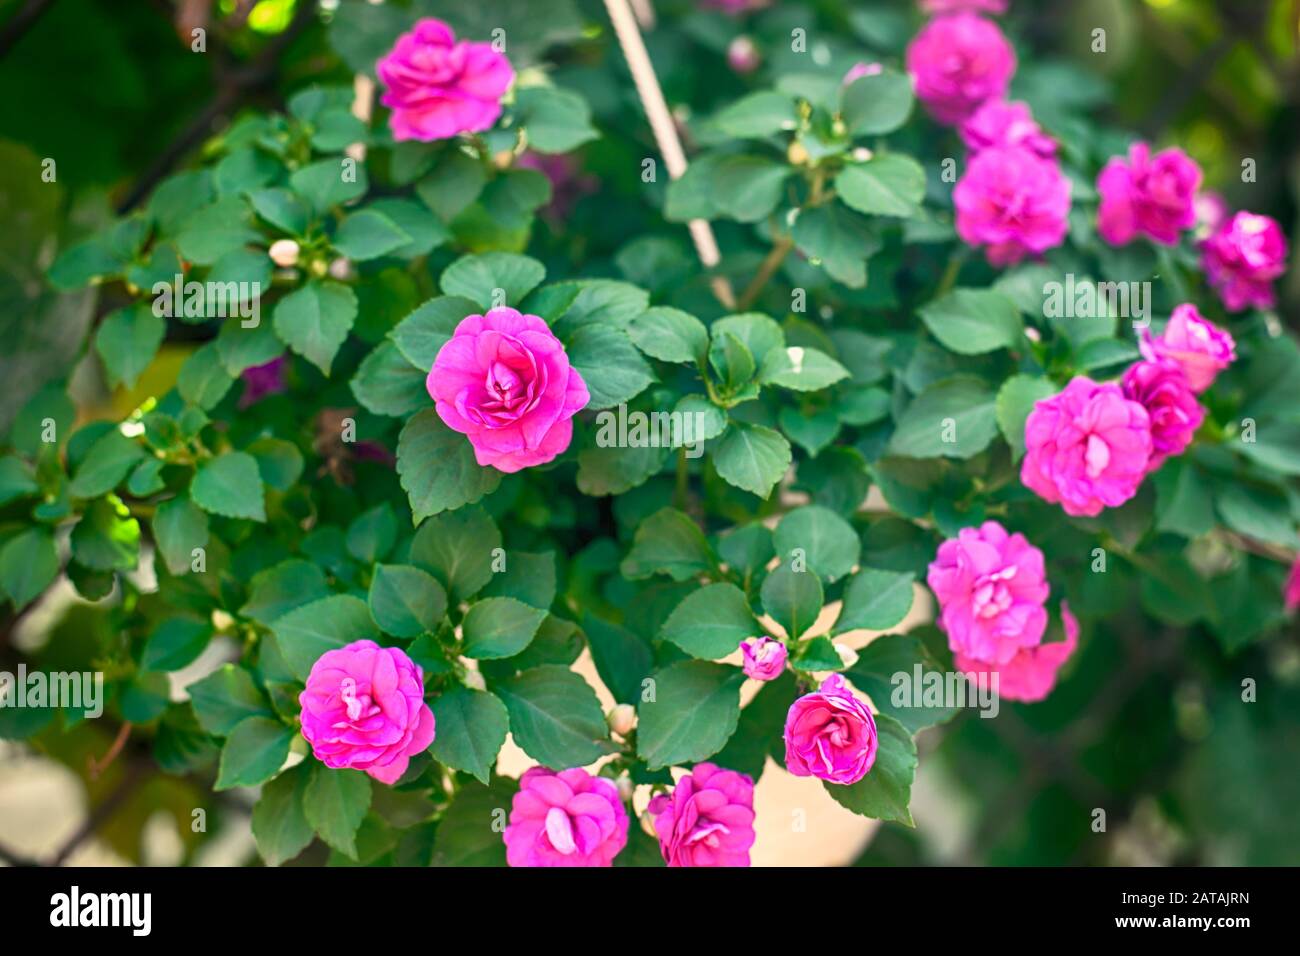 Pink Begonia flowering in flower pot outdoors. Close-up. Stock Photo